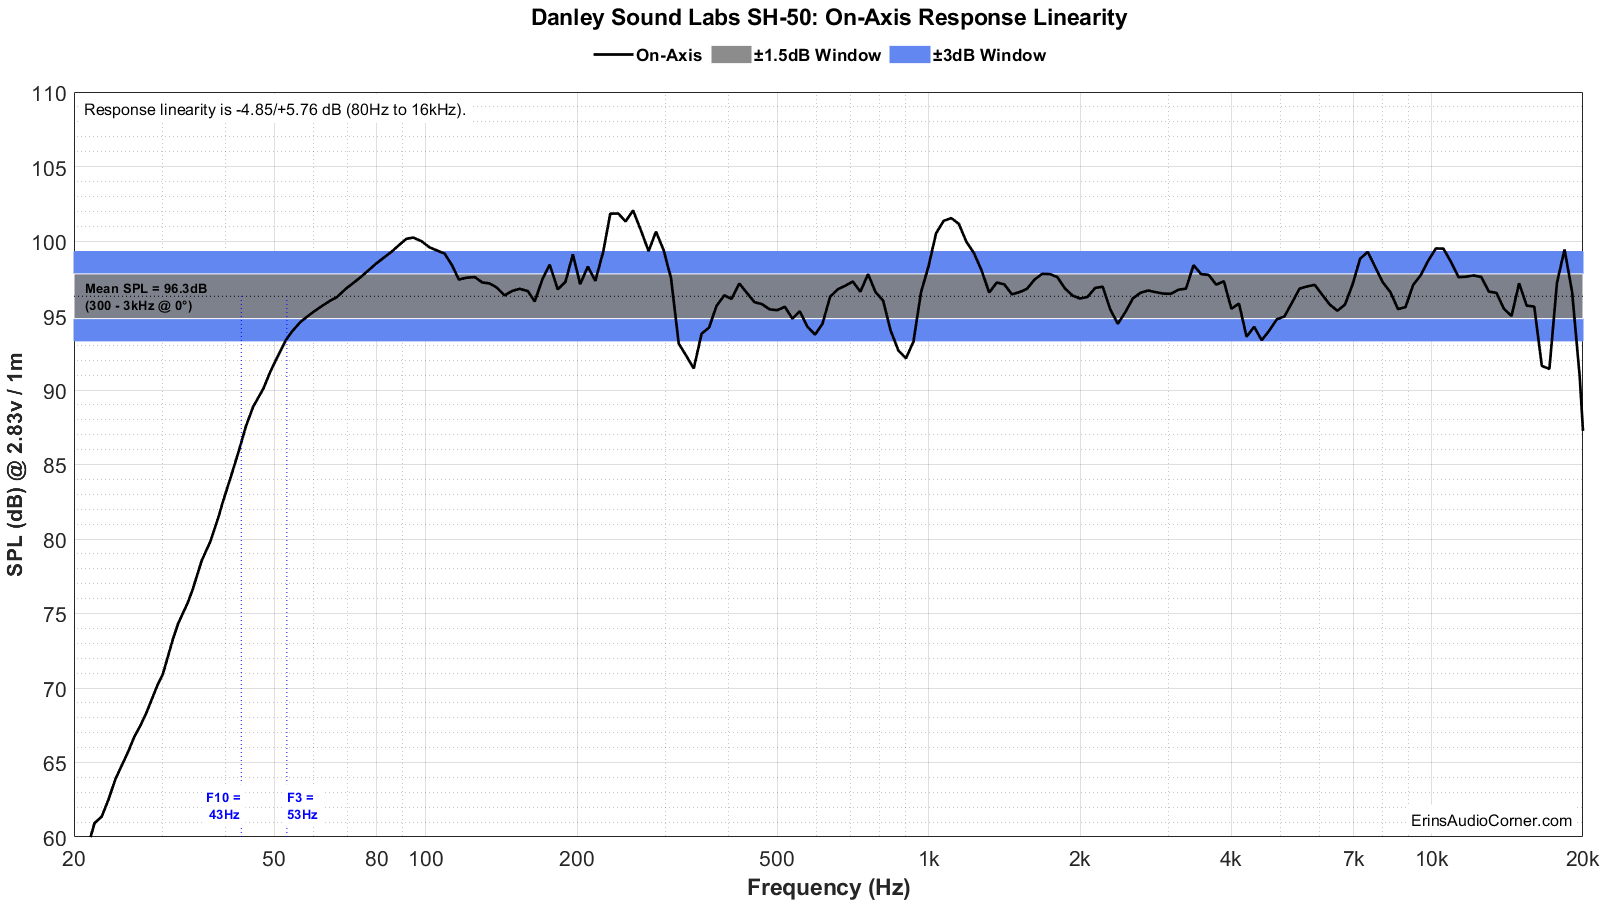 Danley Sound Labs SH-50 FR_Linearity.png